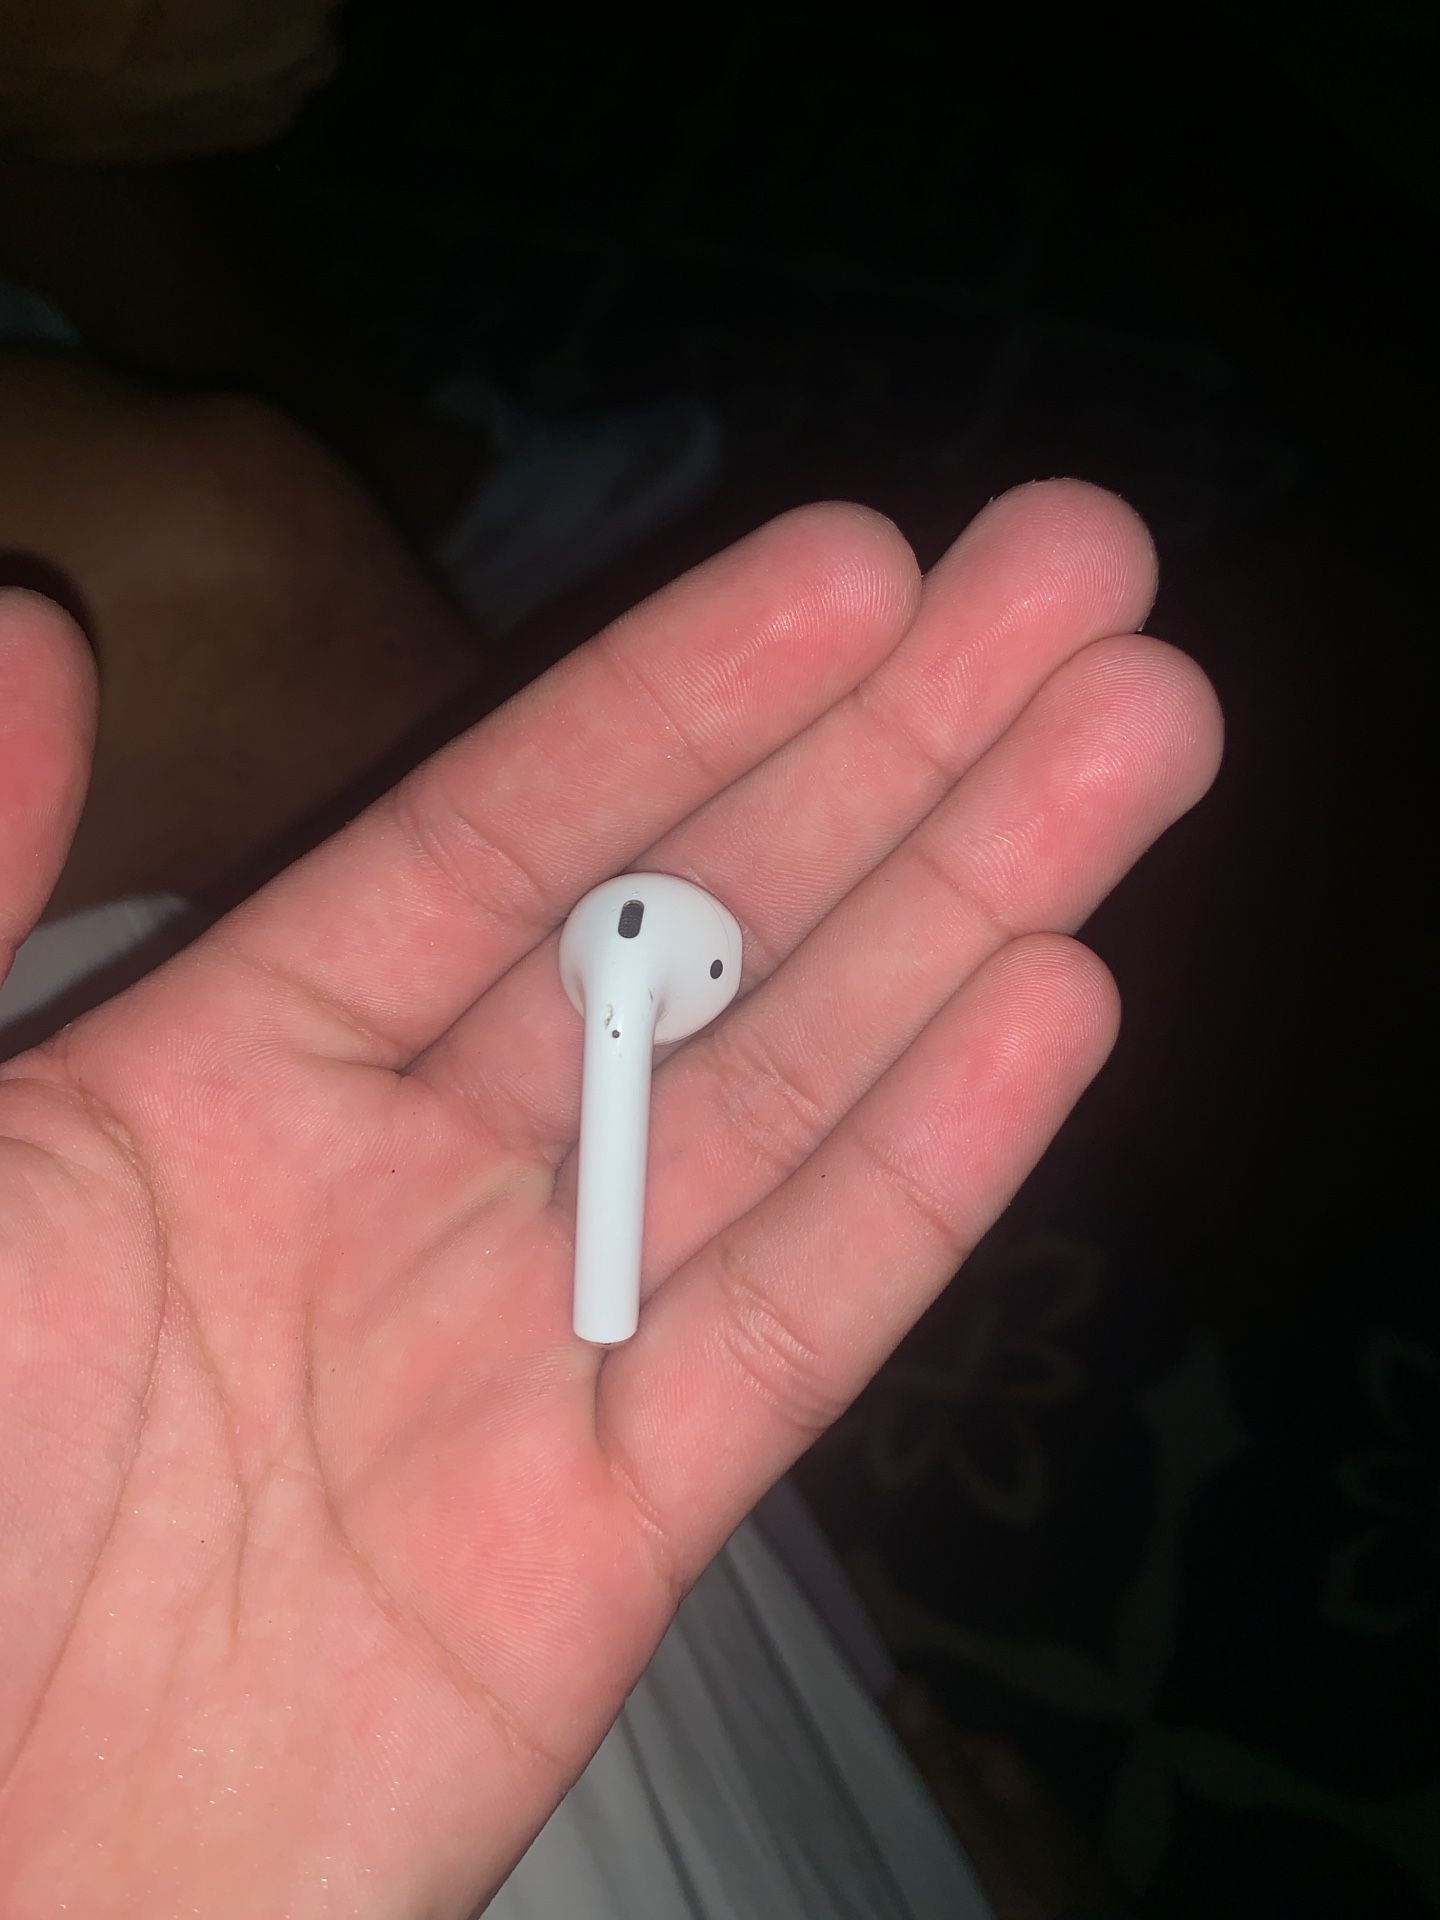 Airpod first generation right